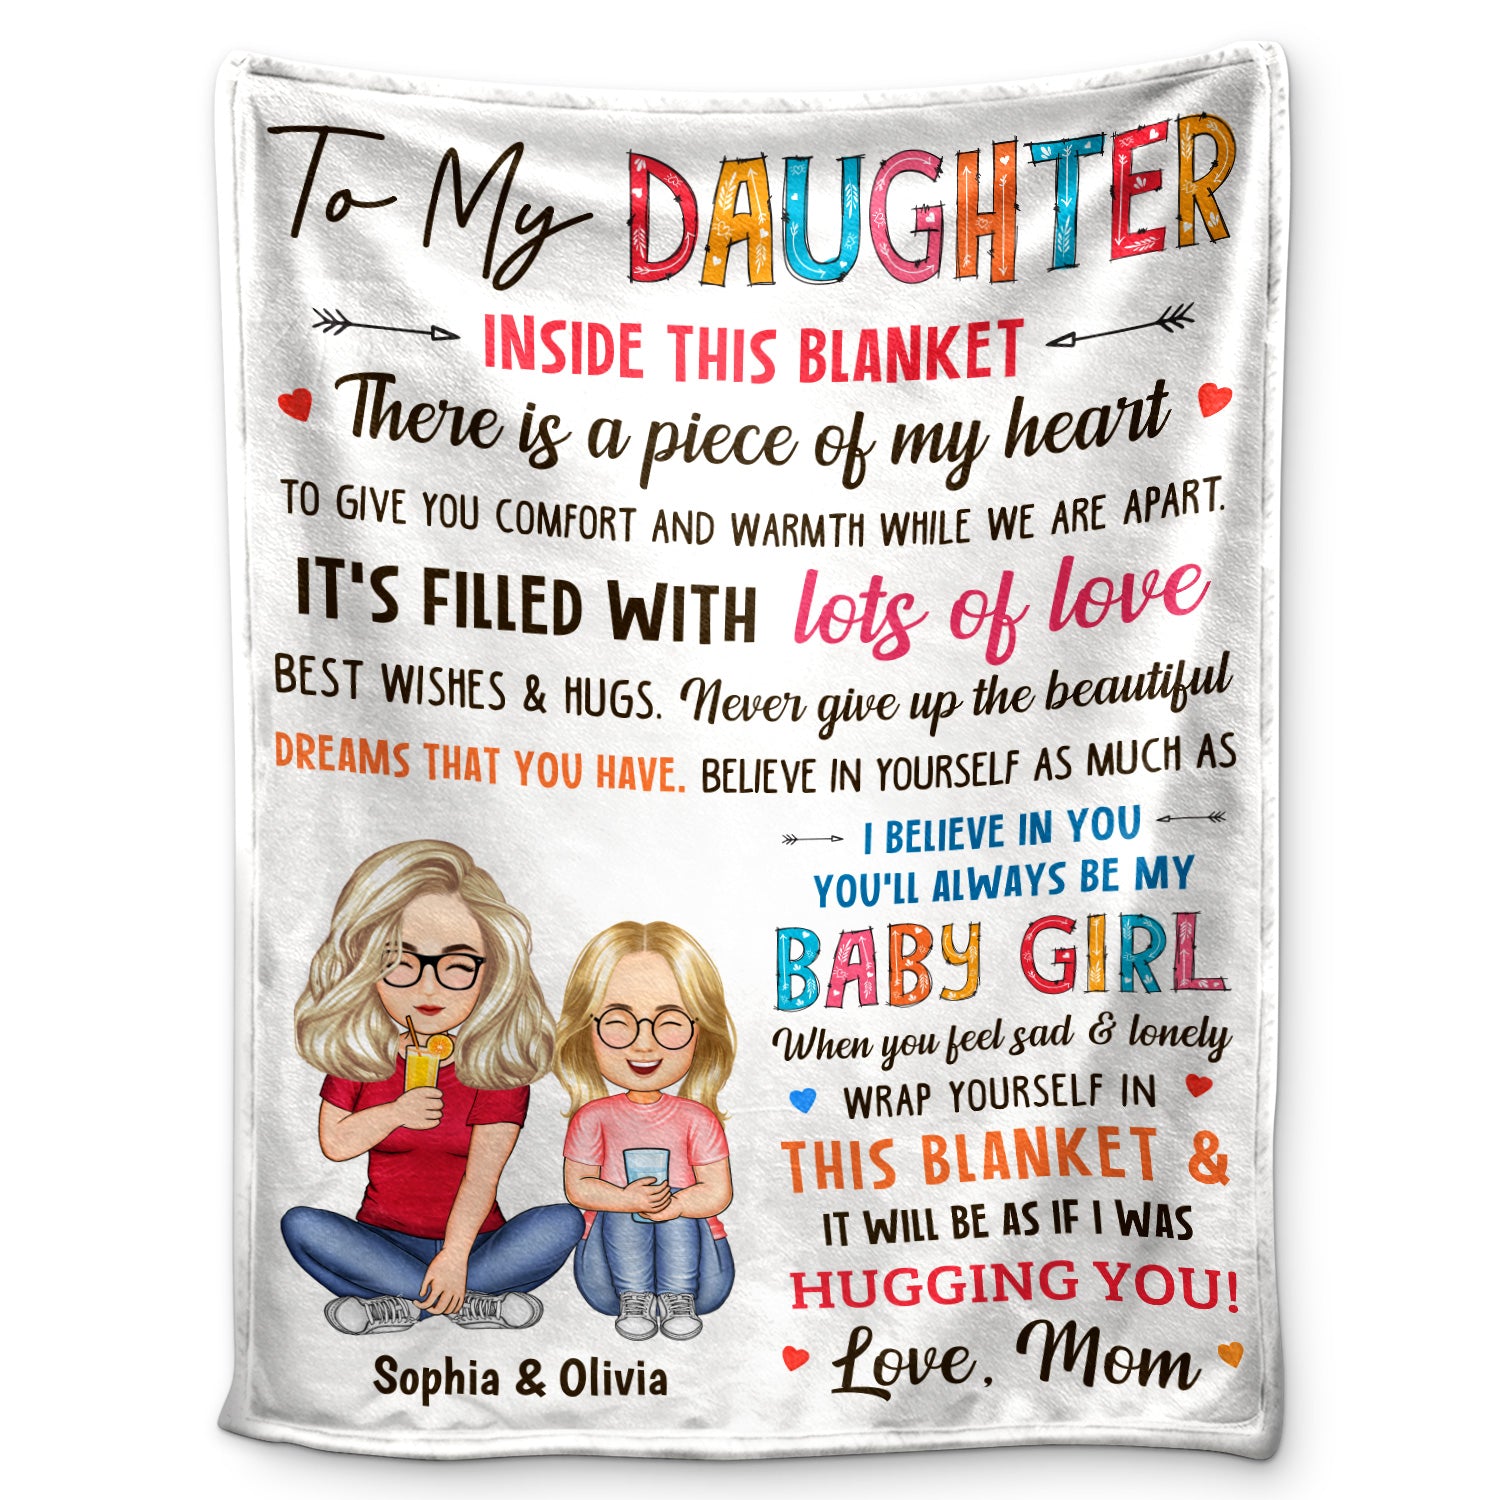 To My Daughter Inside This Blanket - Gift For Daughter - Personalized Fleece Blanket